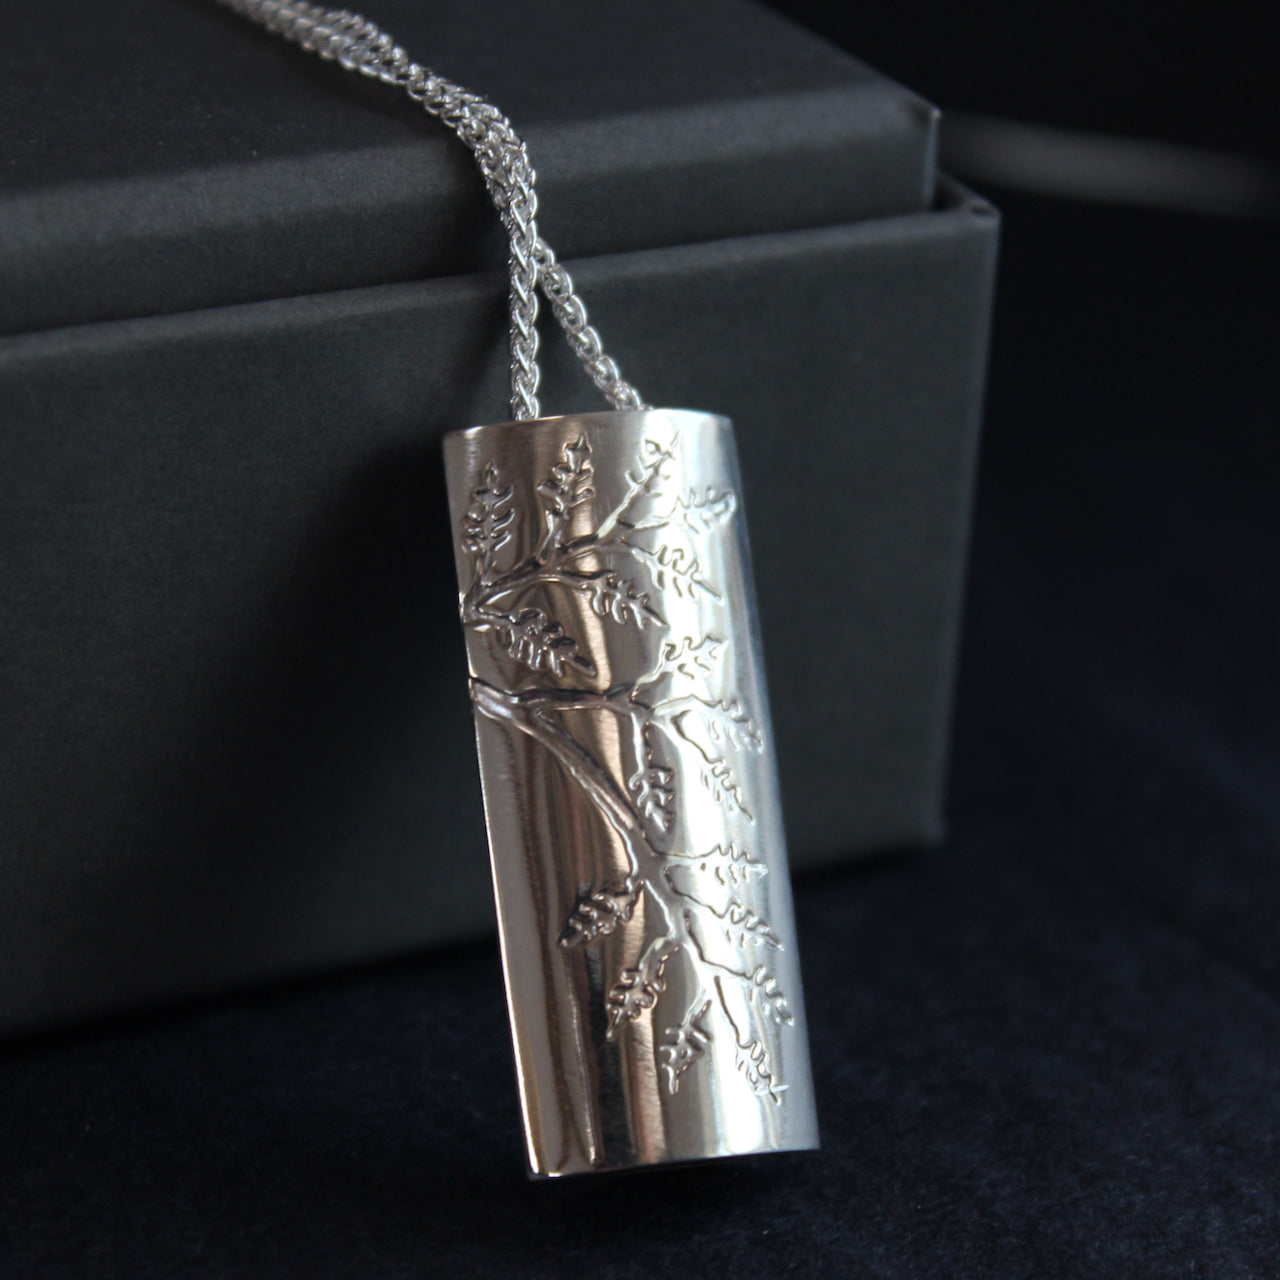 Plantae pendant embossed with ash leaves in silver by Beverly Bartlett